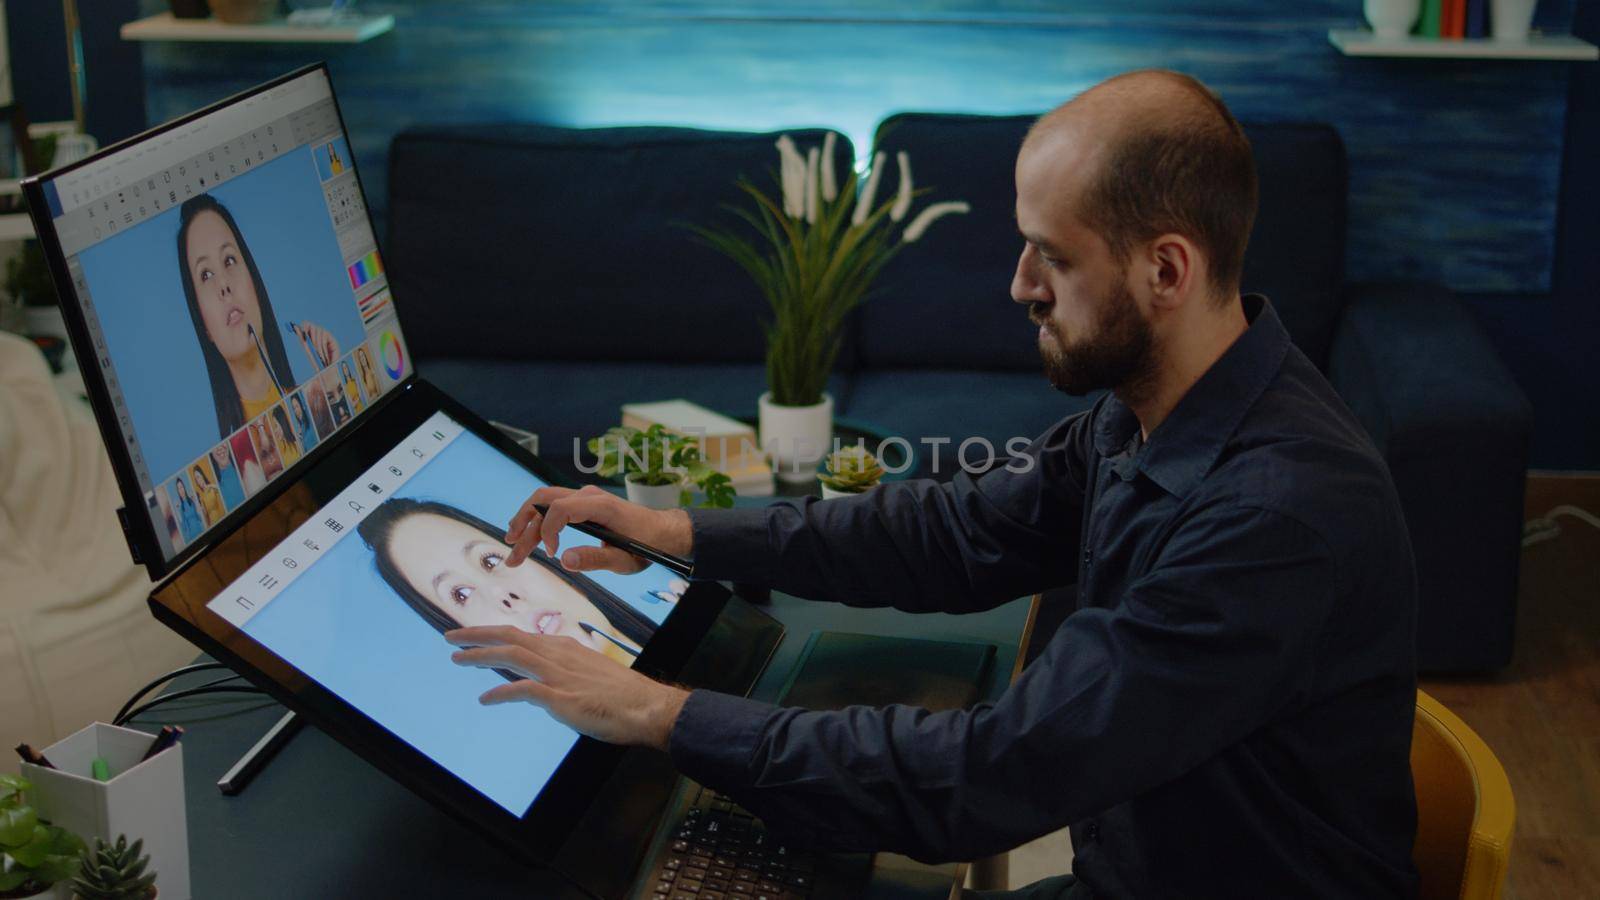 Media artist working on touch screen monitor to edit pictures in photography workspace. Man photographer using retouching software and graphic tablet with stylus on photos at studio.